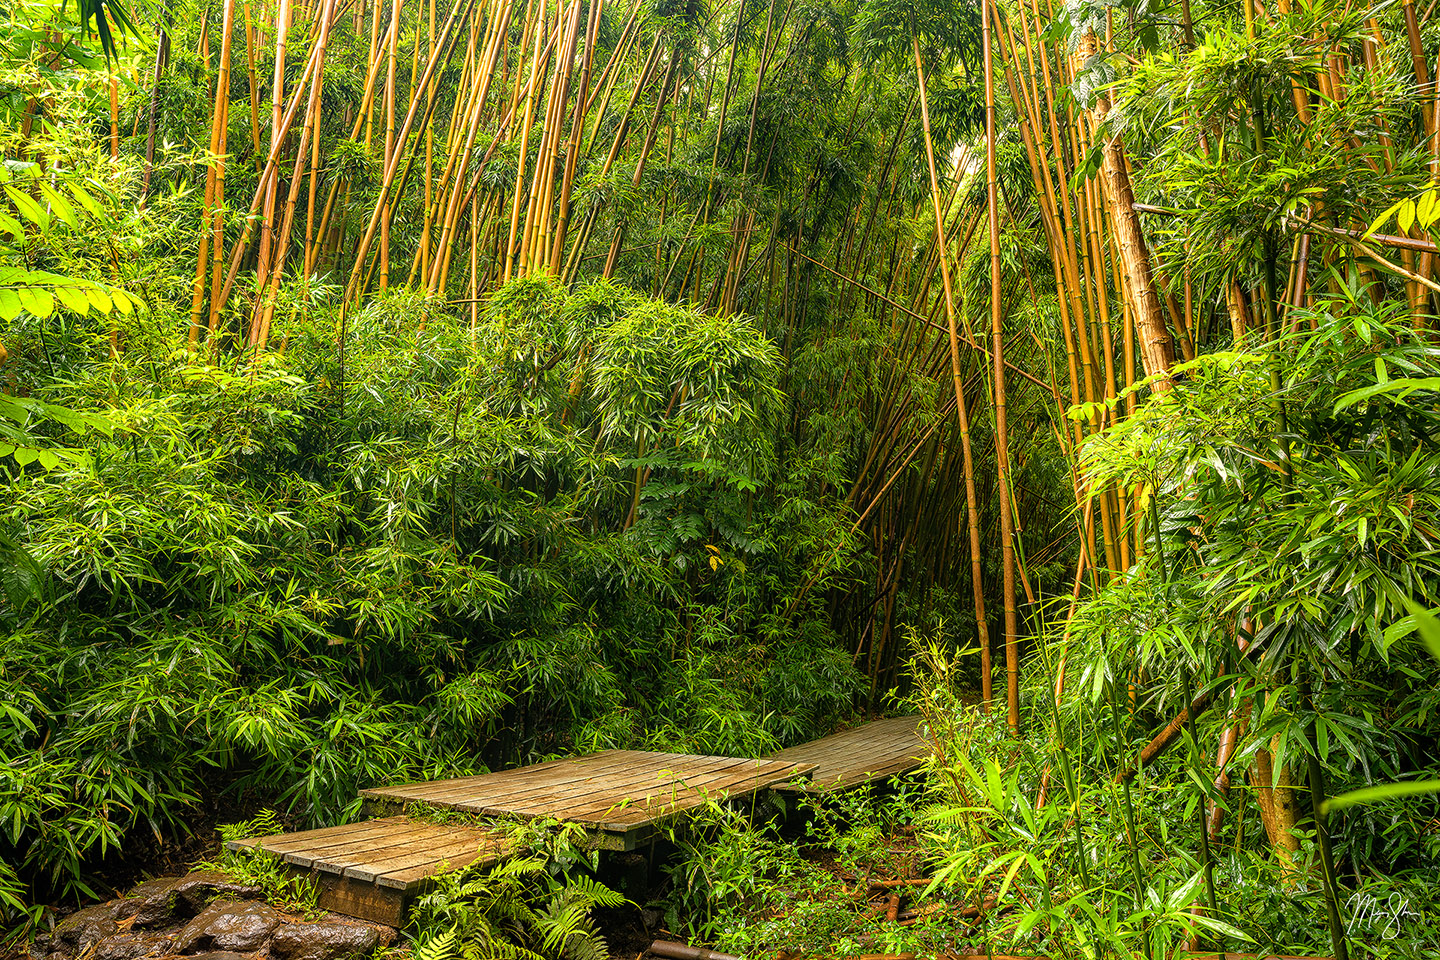 Path into the bamboo